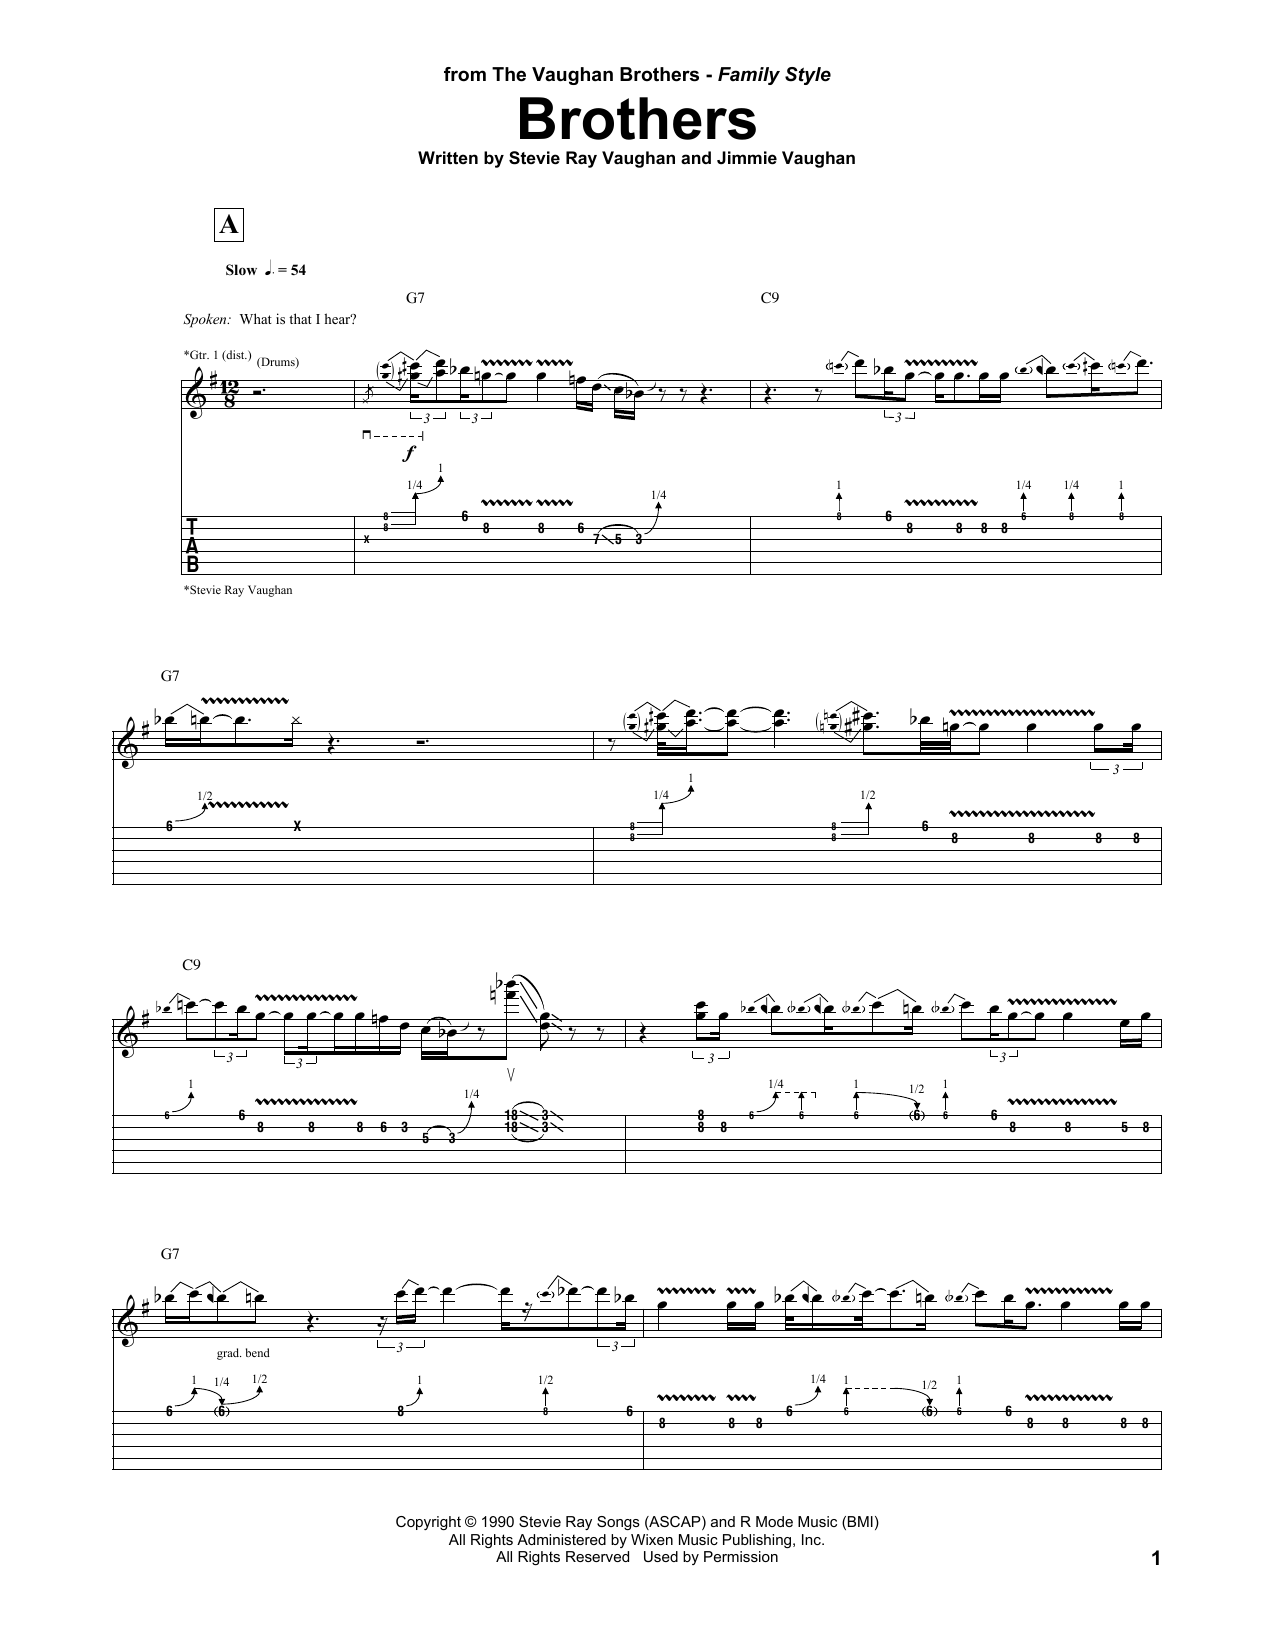 Download Stevie Ray Vaughan Brothers Sheet Music